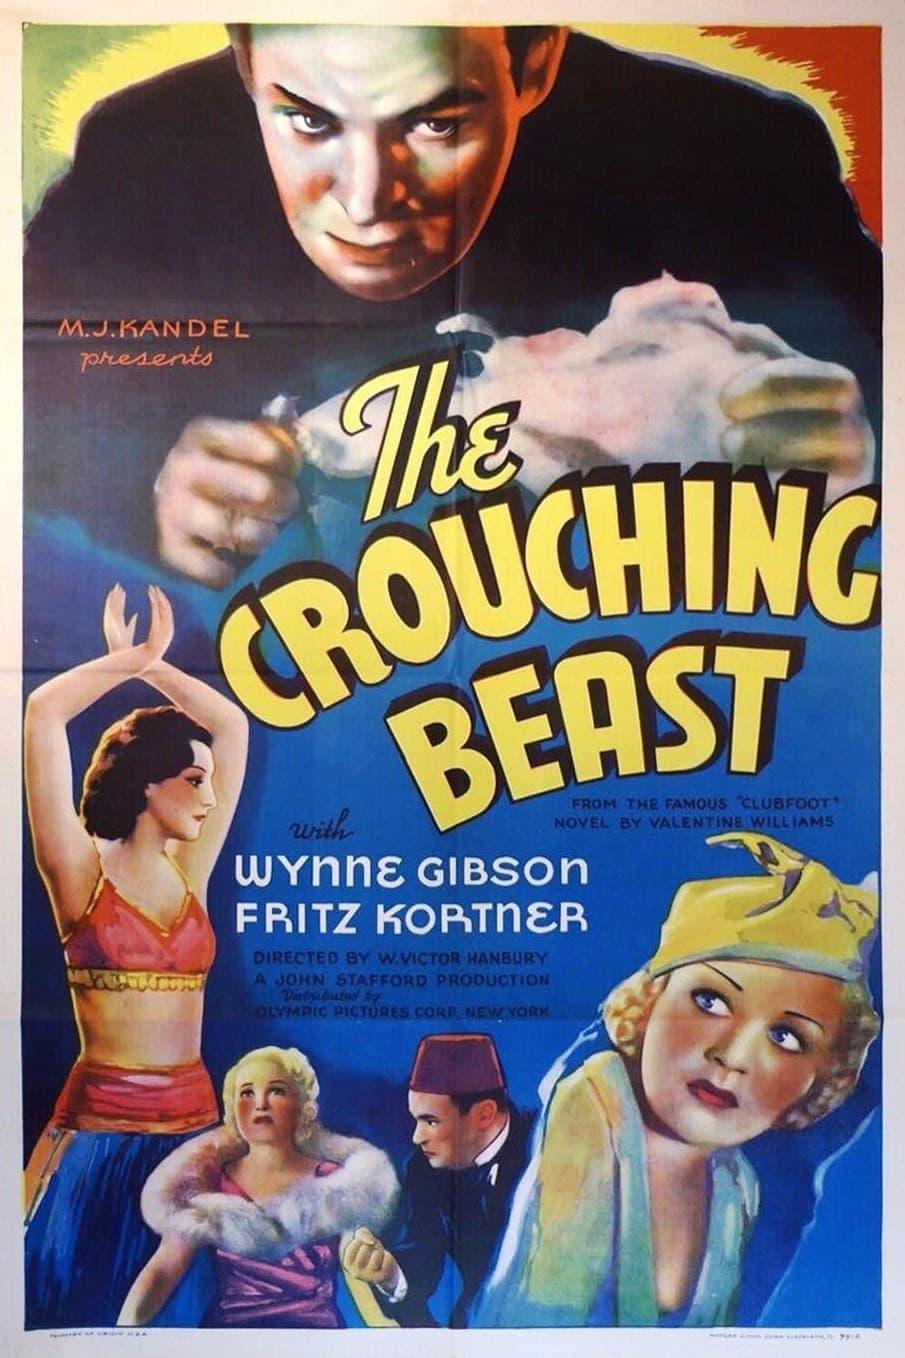 The Crouching Beast poster